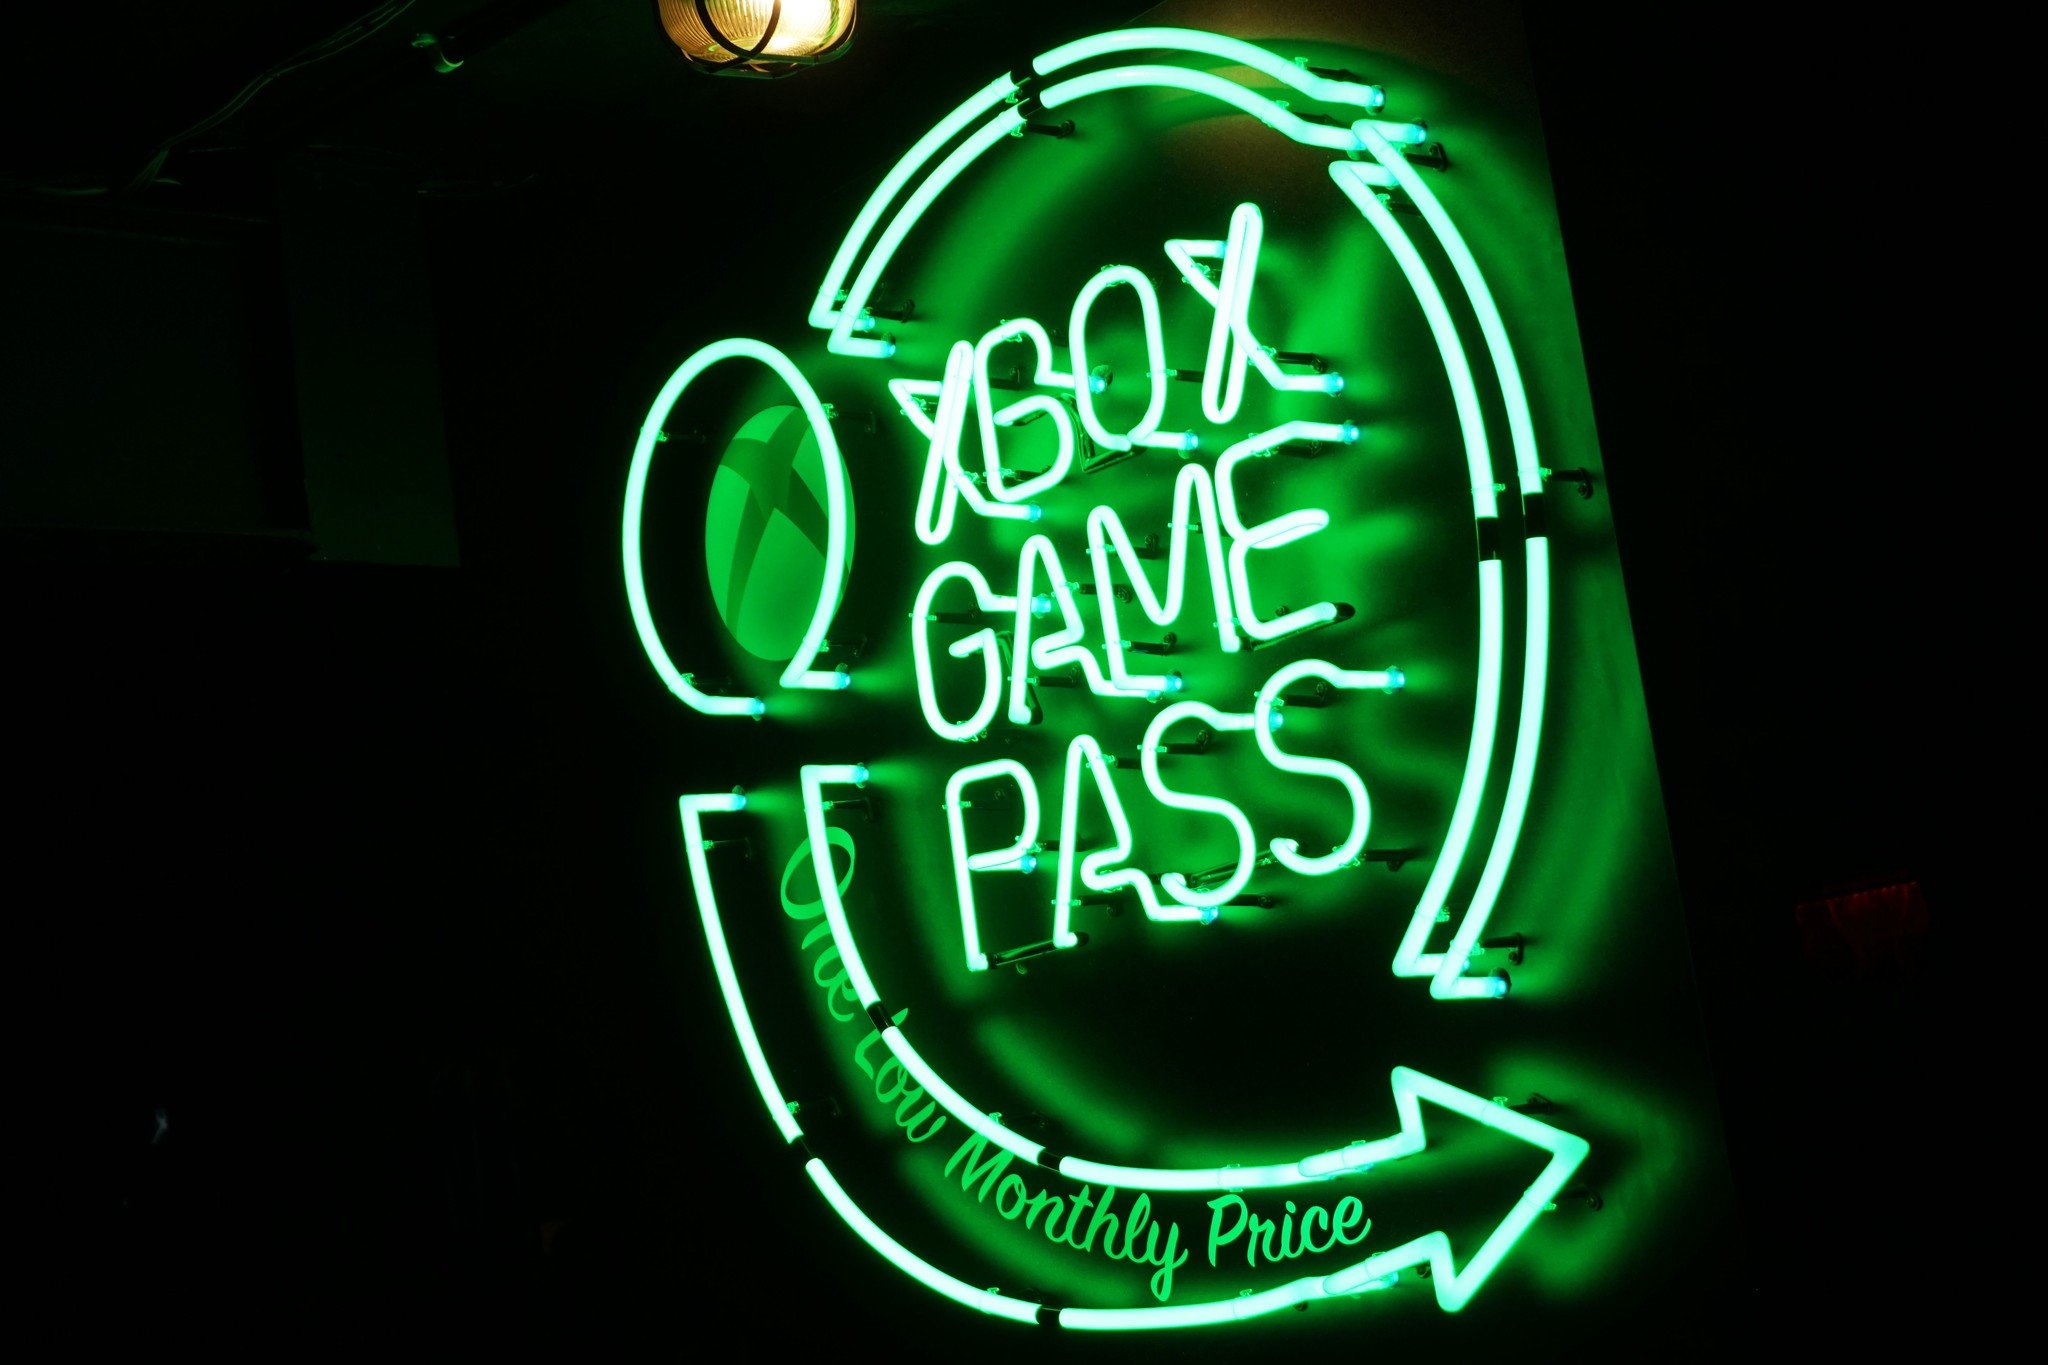 Xbox Game Pass Ultimate 12 Month + Game Pass Core, USA, GLOBAL REGION